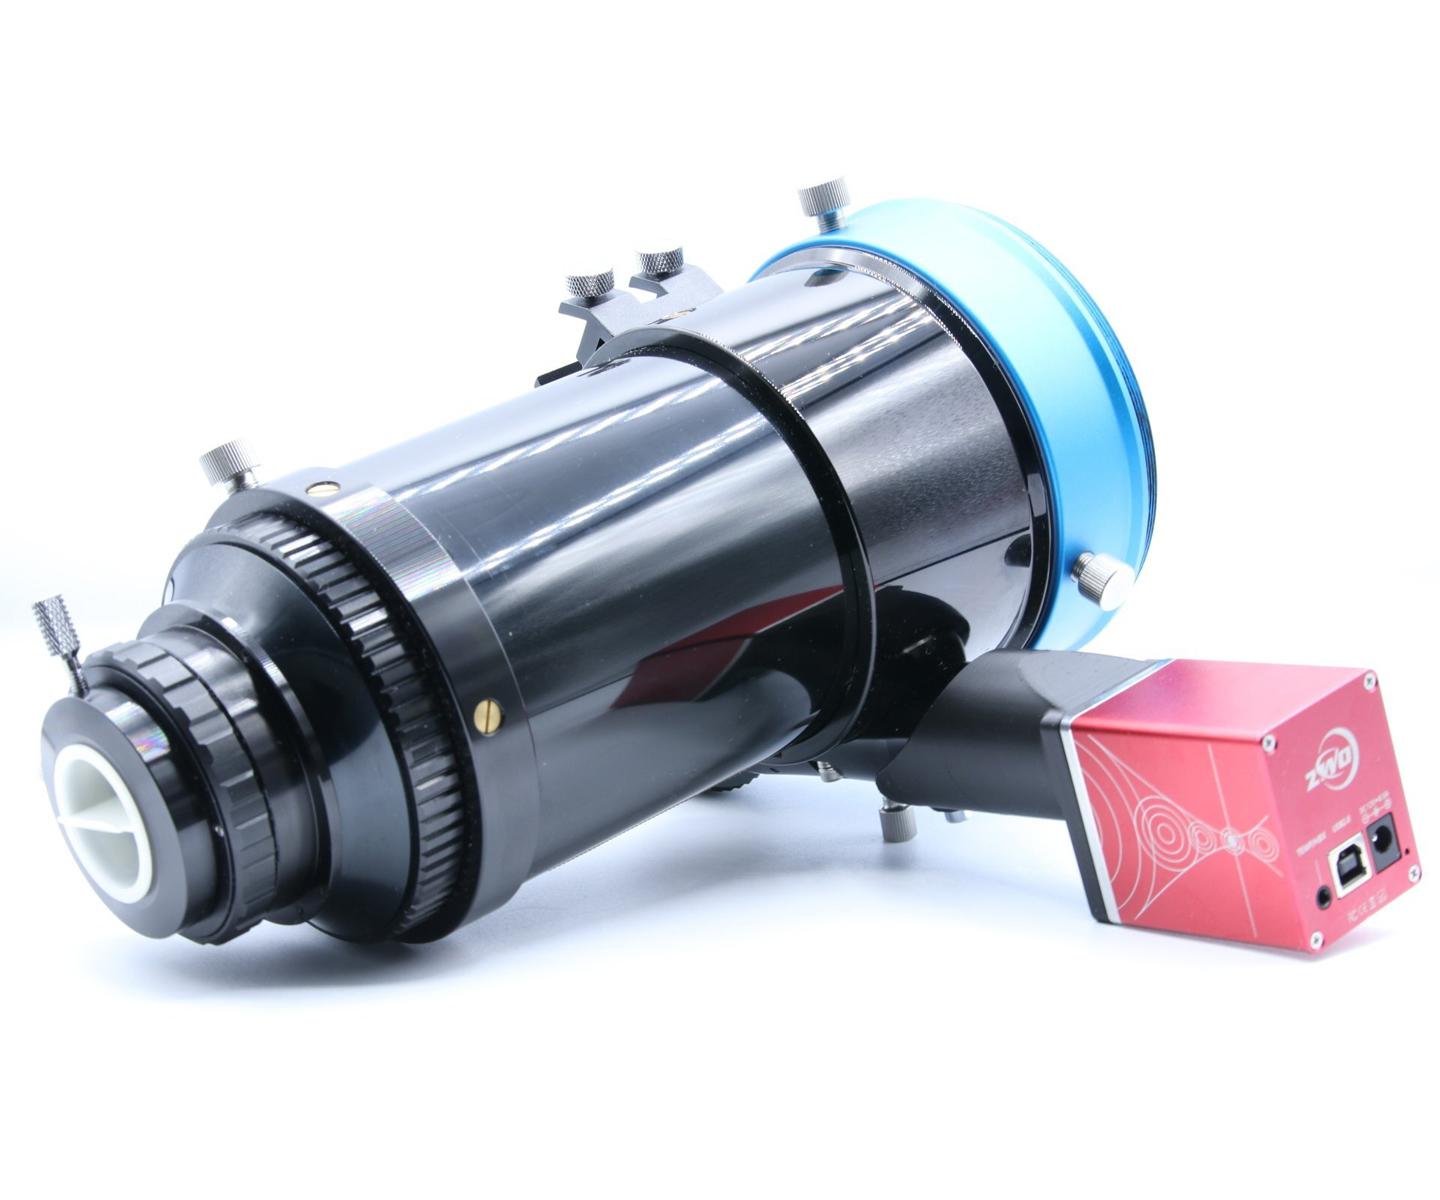  Equip the 3.7" Deluxe RAP focuser from TS-Optics with the ZWO EAF motor focus system [EN] 